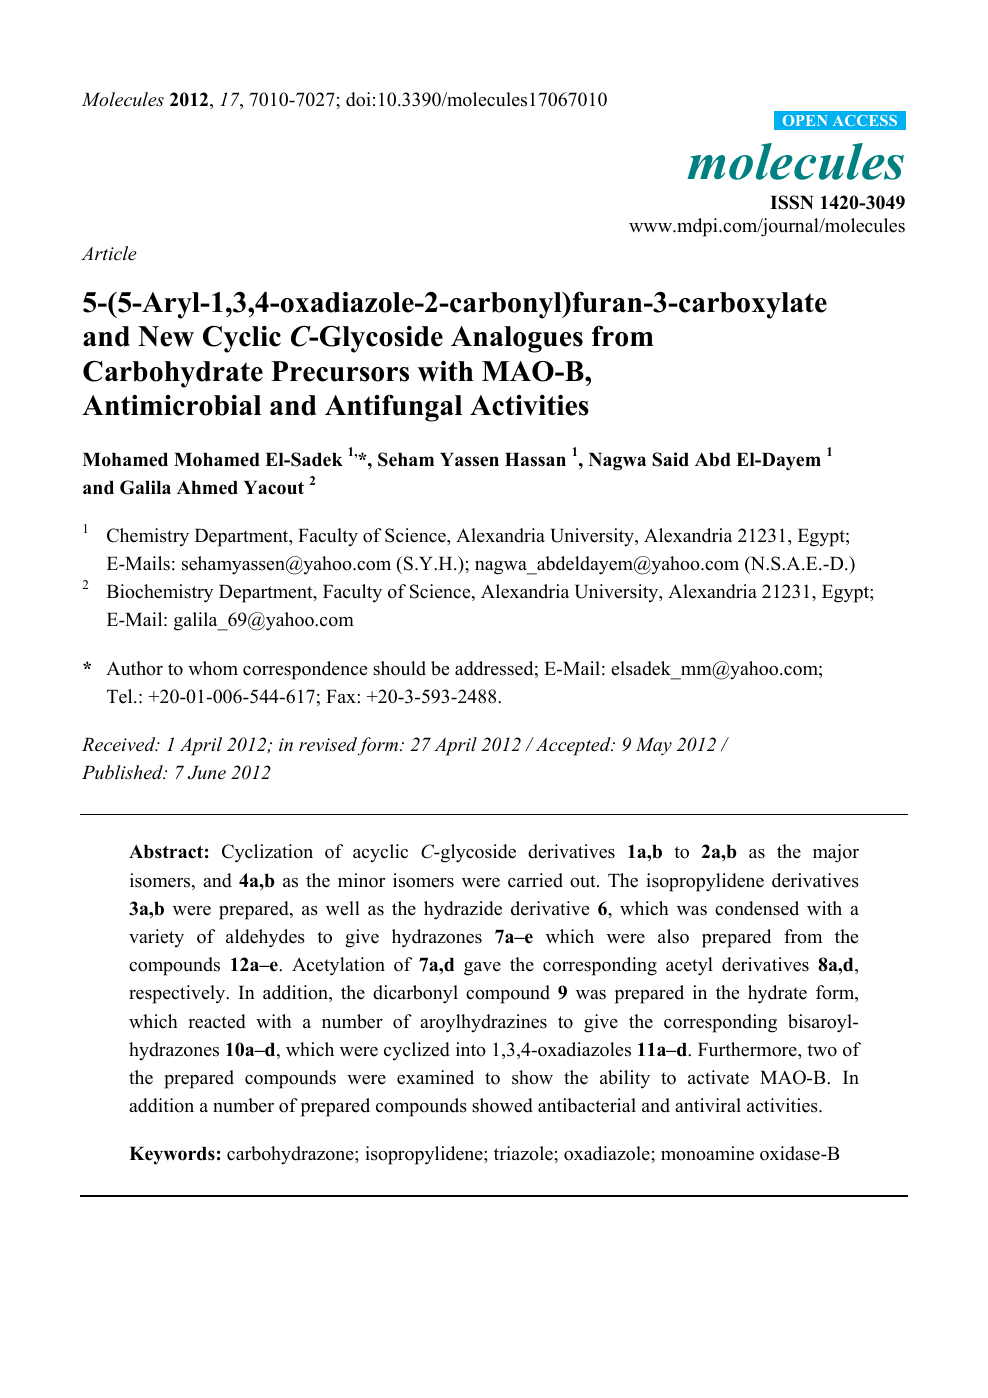 5 5 Aryl 1 3 4 Oxadiazole 2 Carbonyl Furan 3 Carboxylate And New Cyclic C Glycoside Analogues From Carbohydrate Precursors With Mao B Antimicrobial And Antifungal Activities Topic Of Research Paper In Chemical Sciences Download Scholarly Article